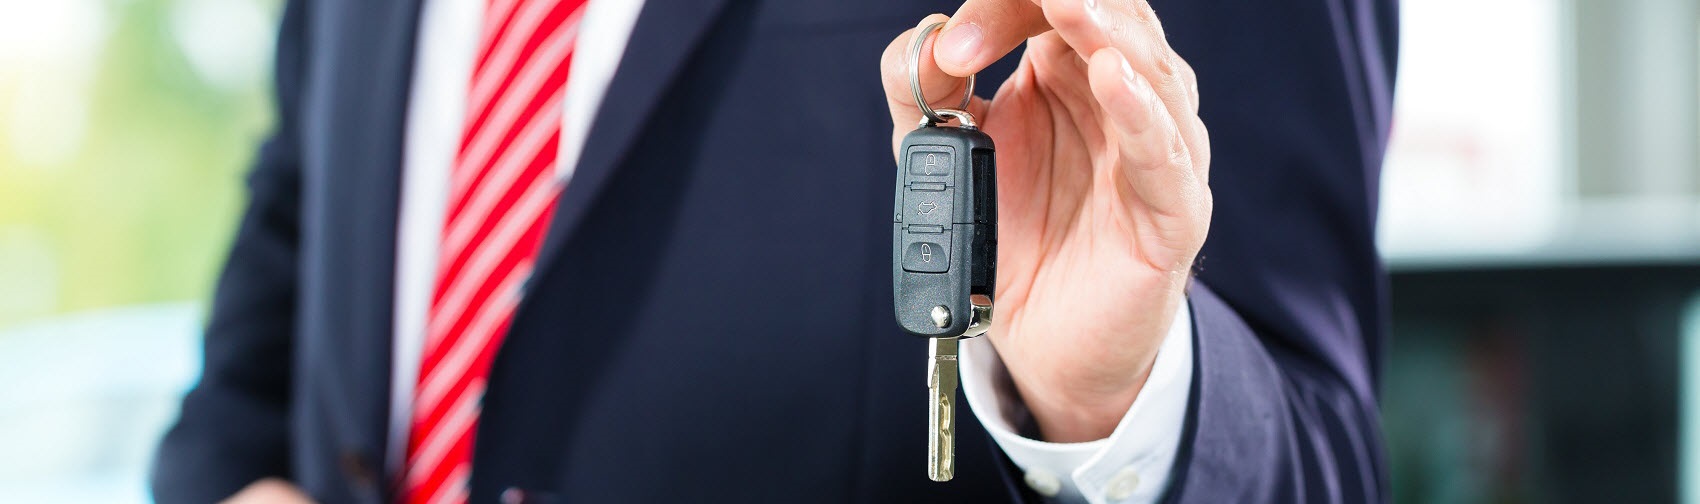 Close up of a person holding up a set of car keys